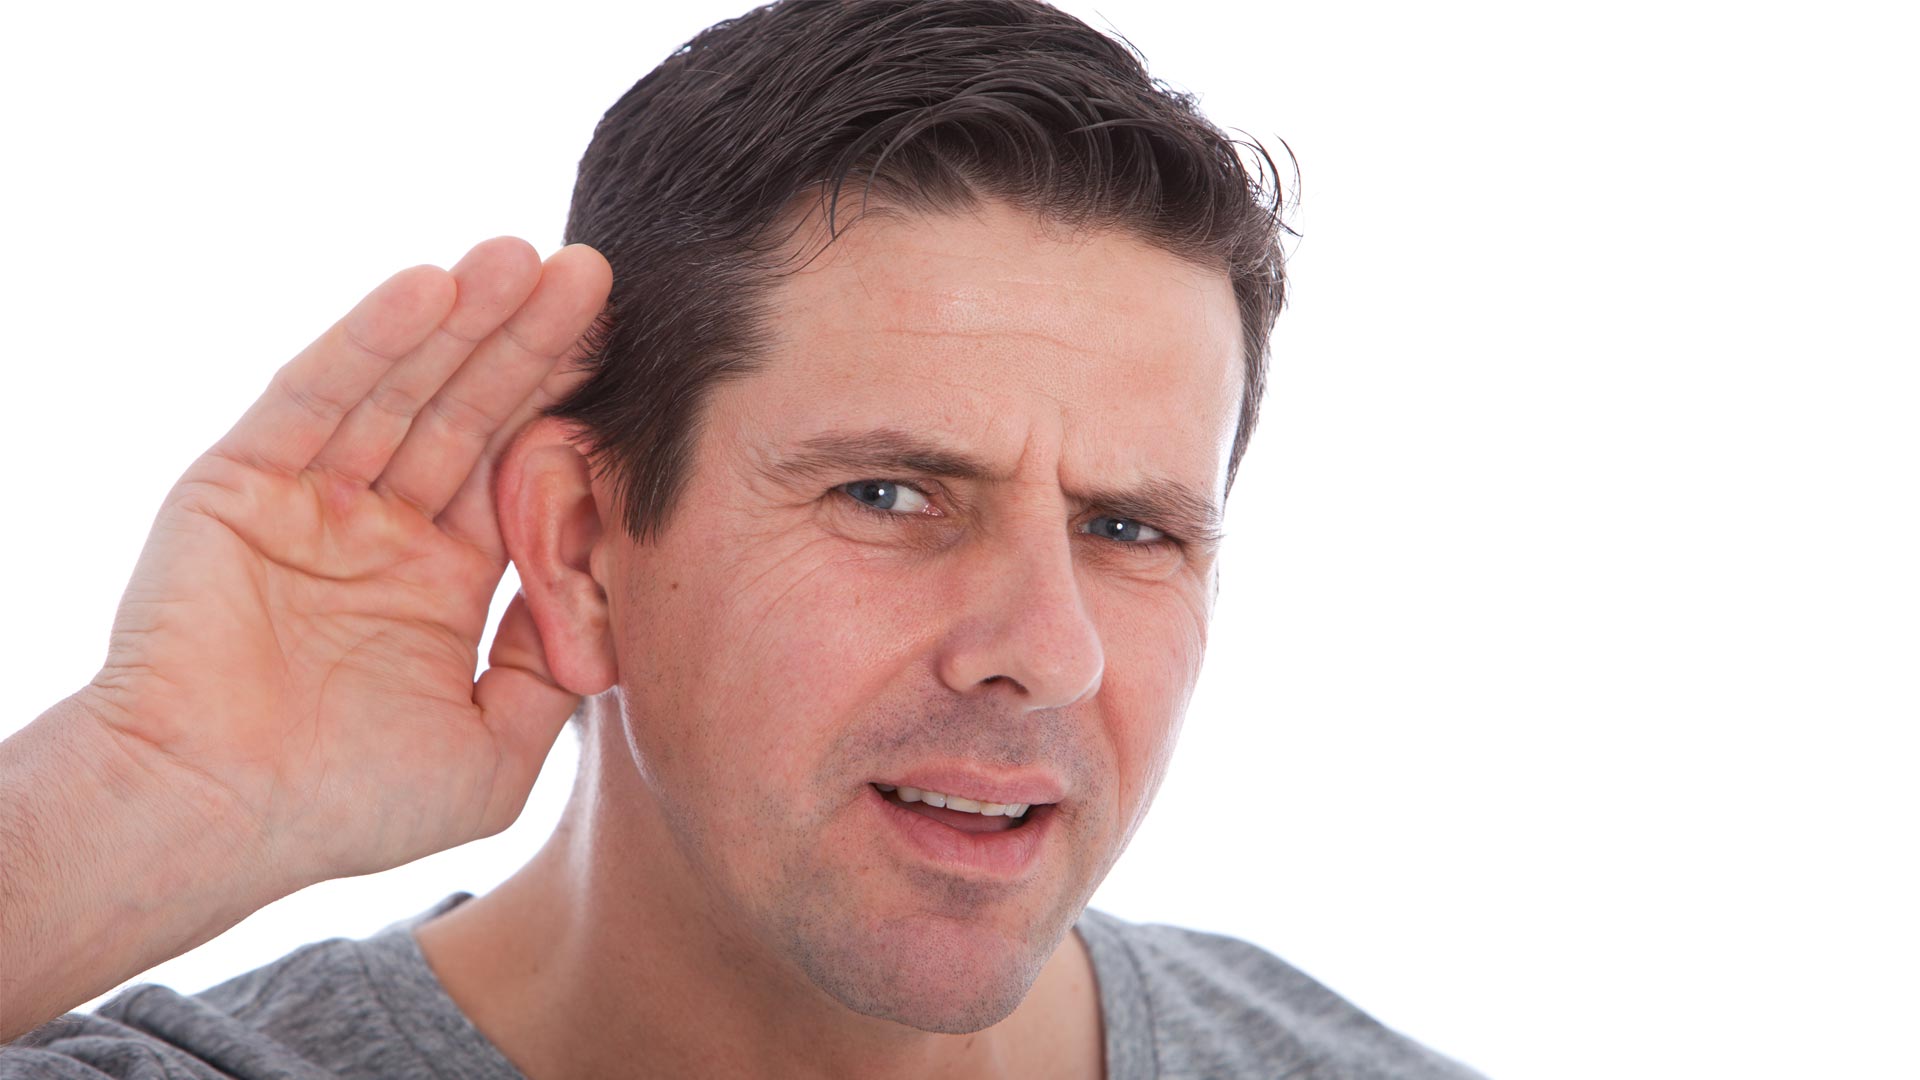 Dealing with hearing Loss